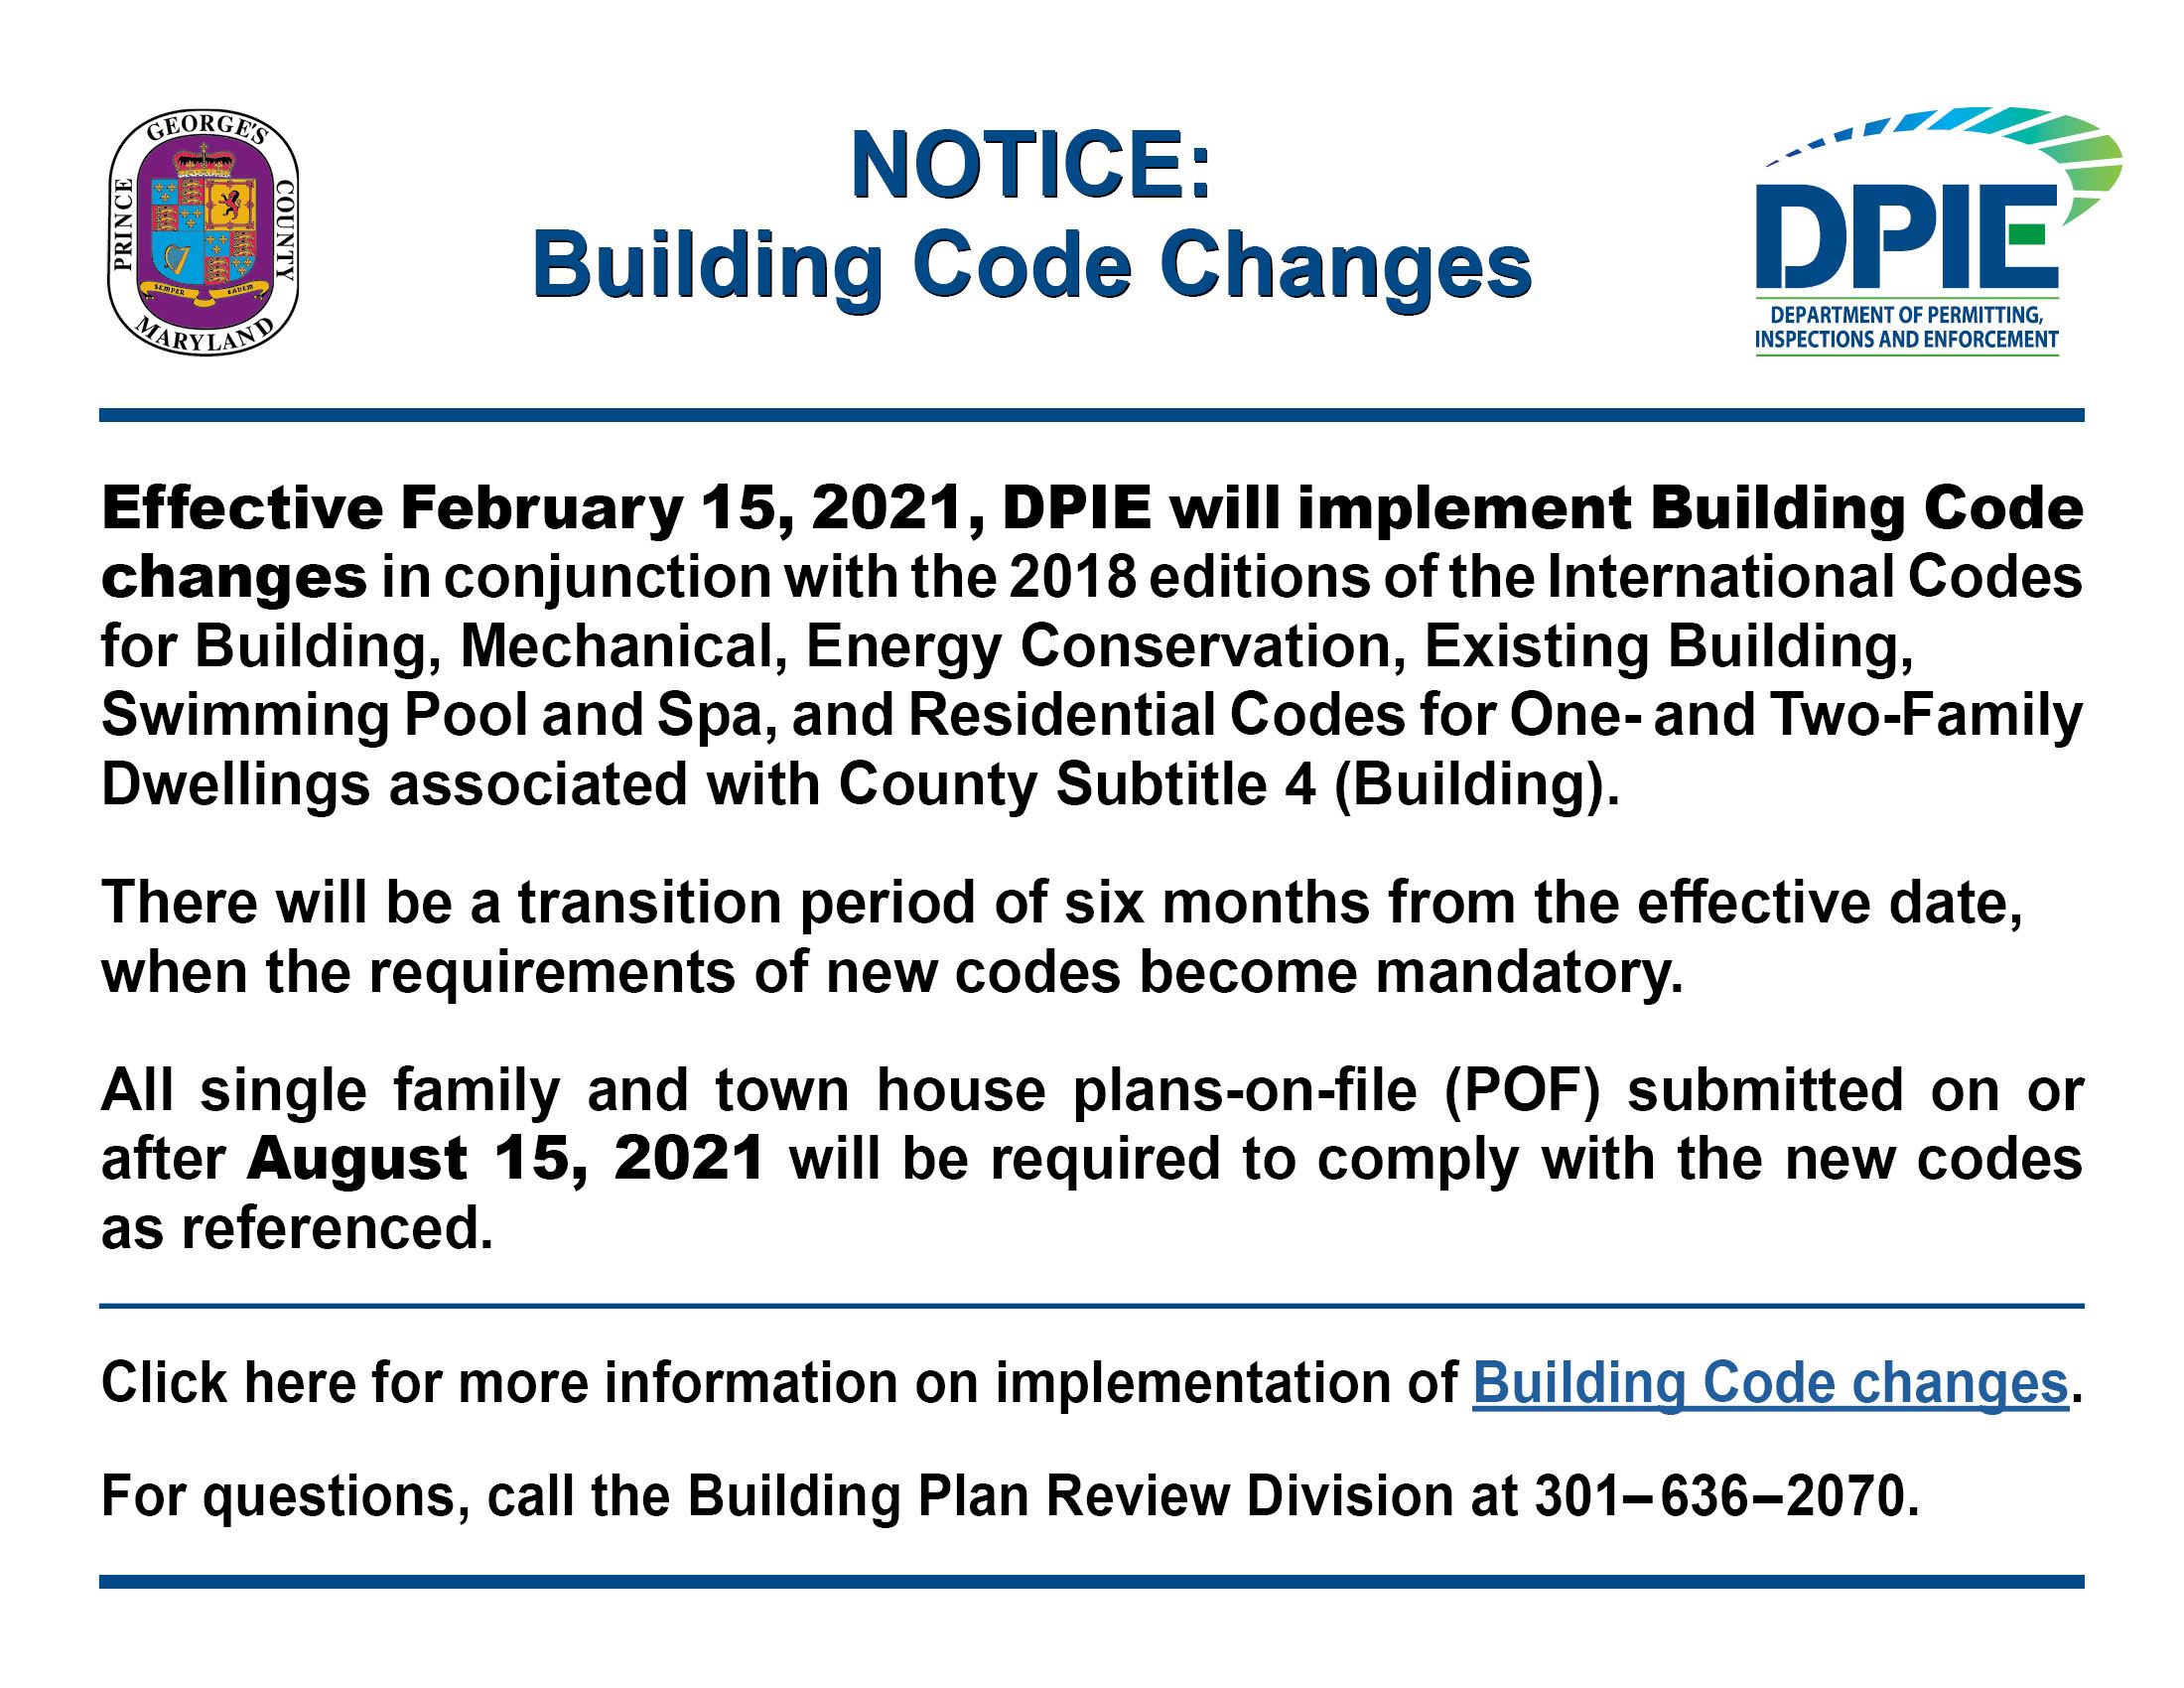 Building Code Changes 2-15-21